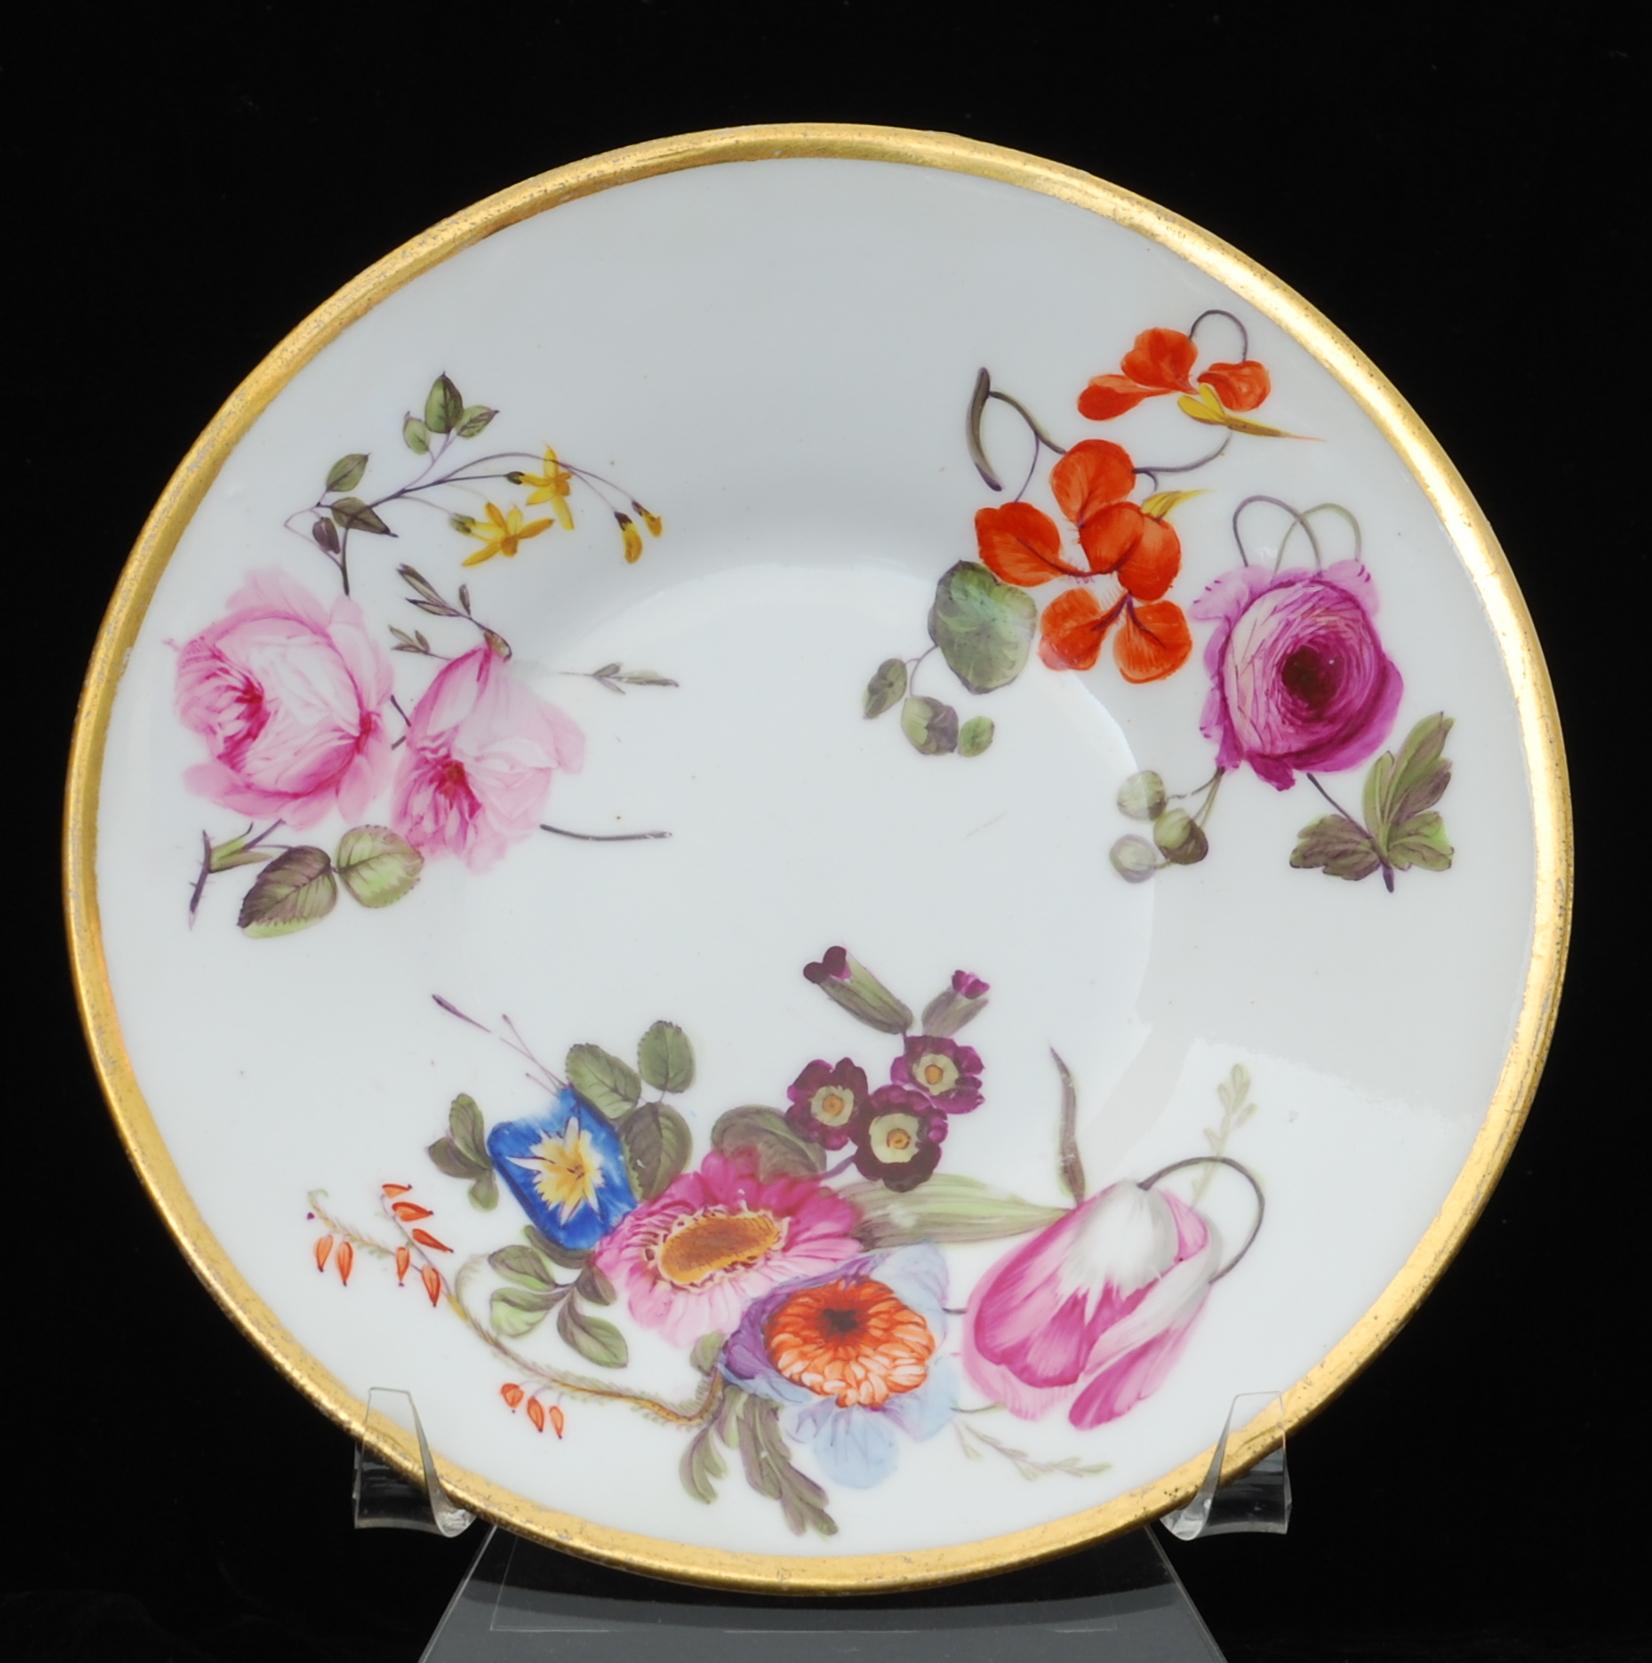 A rare coffee cup and saucer in Nantgarw’s superb soft-paste porcelain. Each piece is gilded and decorated in one of the London workshops with superb flower painting, probably by Moses Webster.

The Nantgarw factory lasted only a few years, but